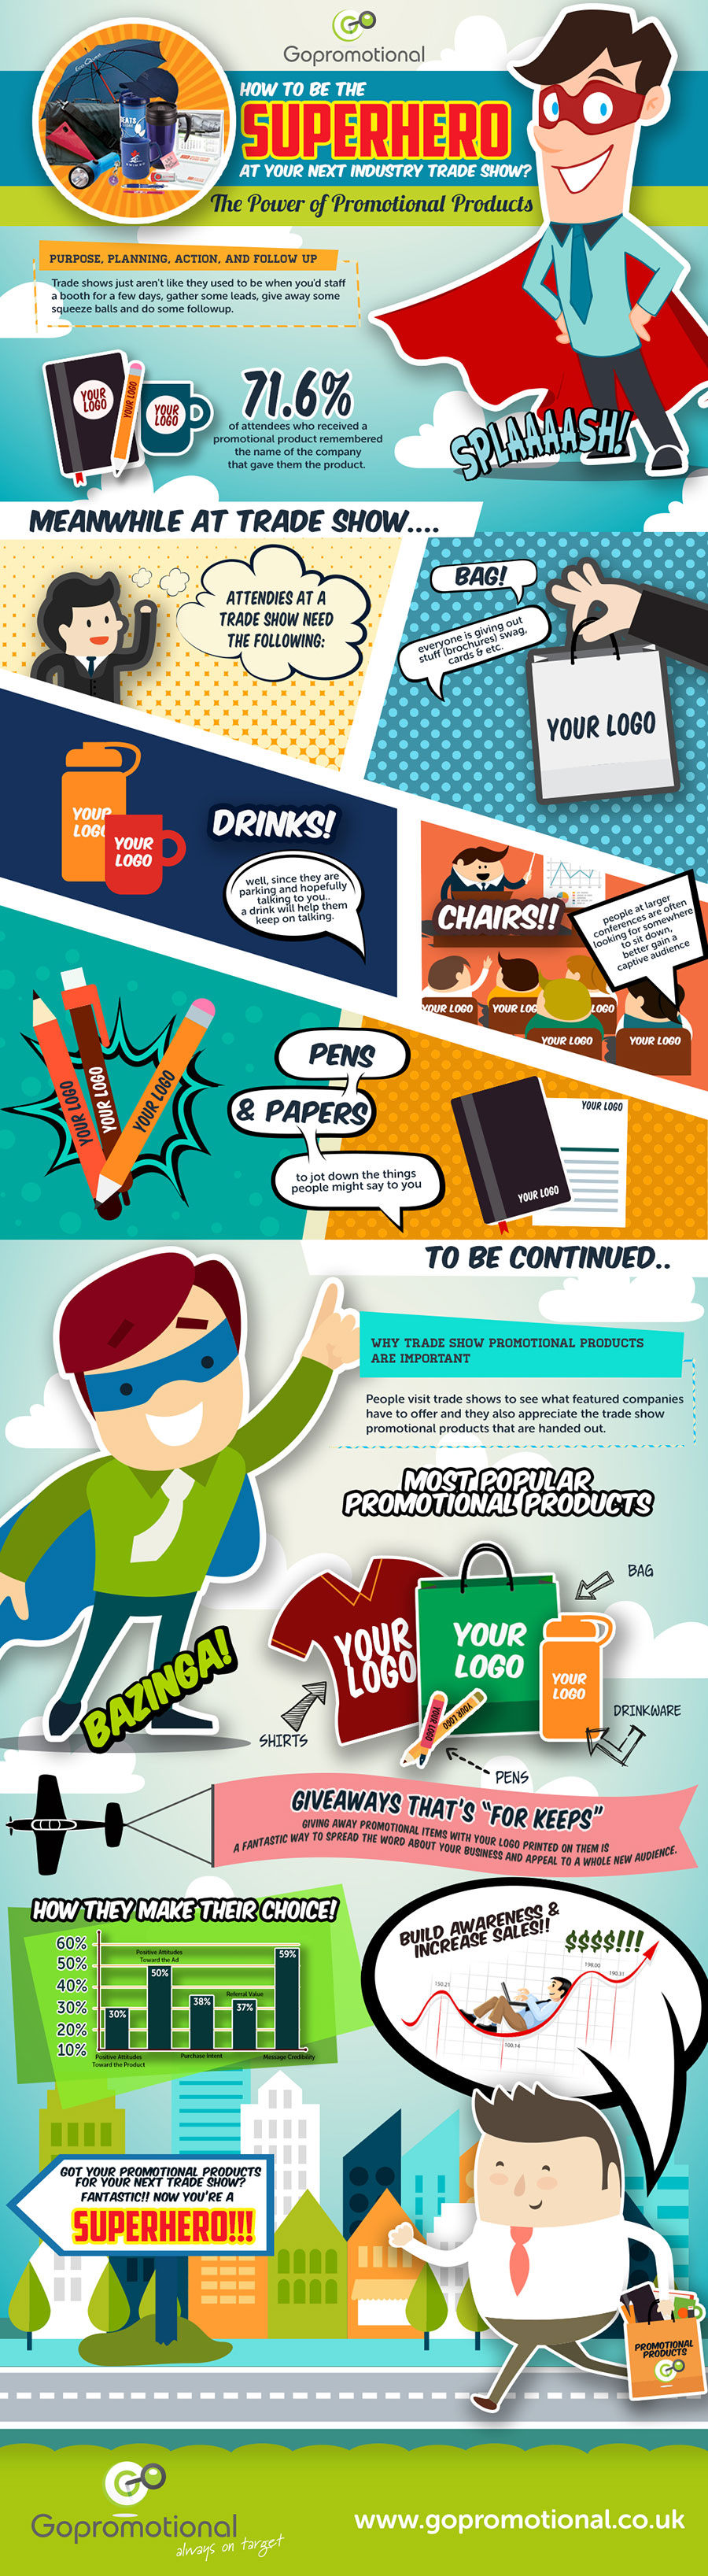 The power of promotional products infographic